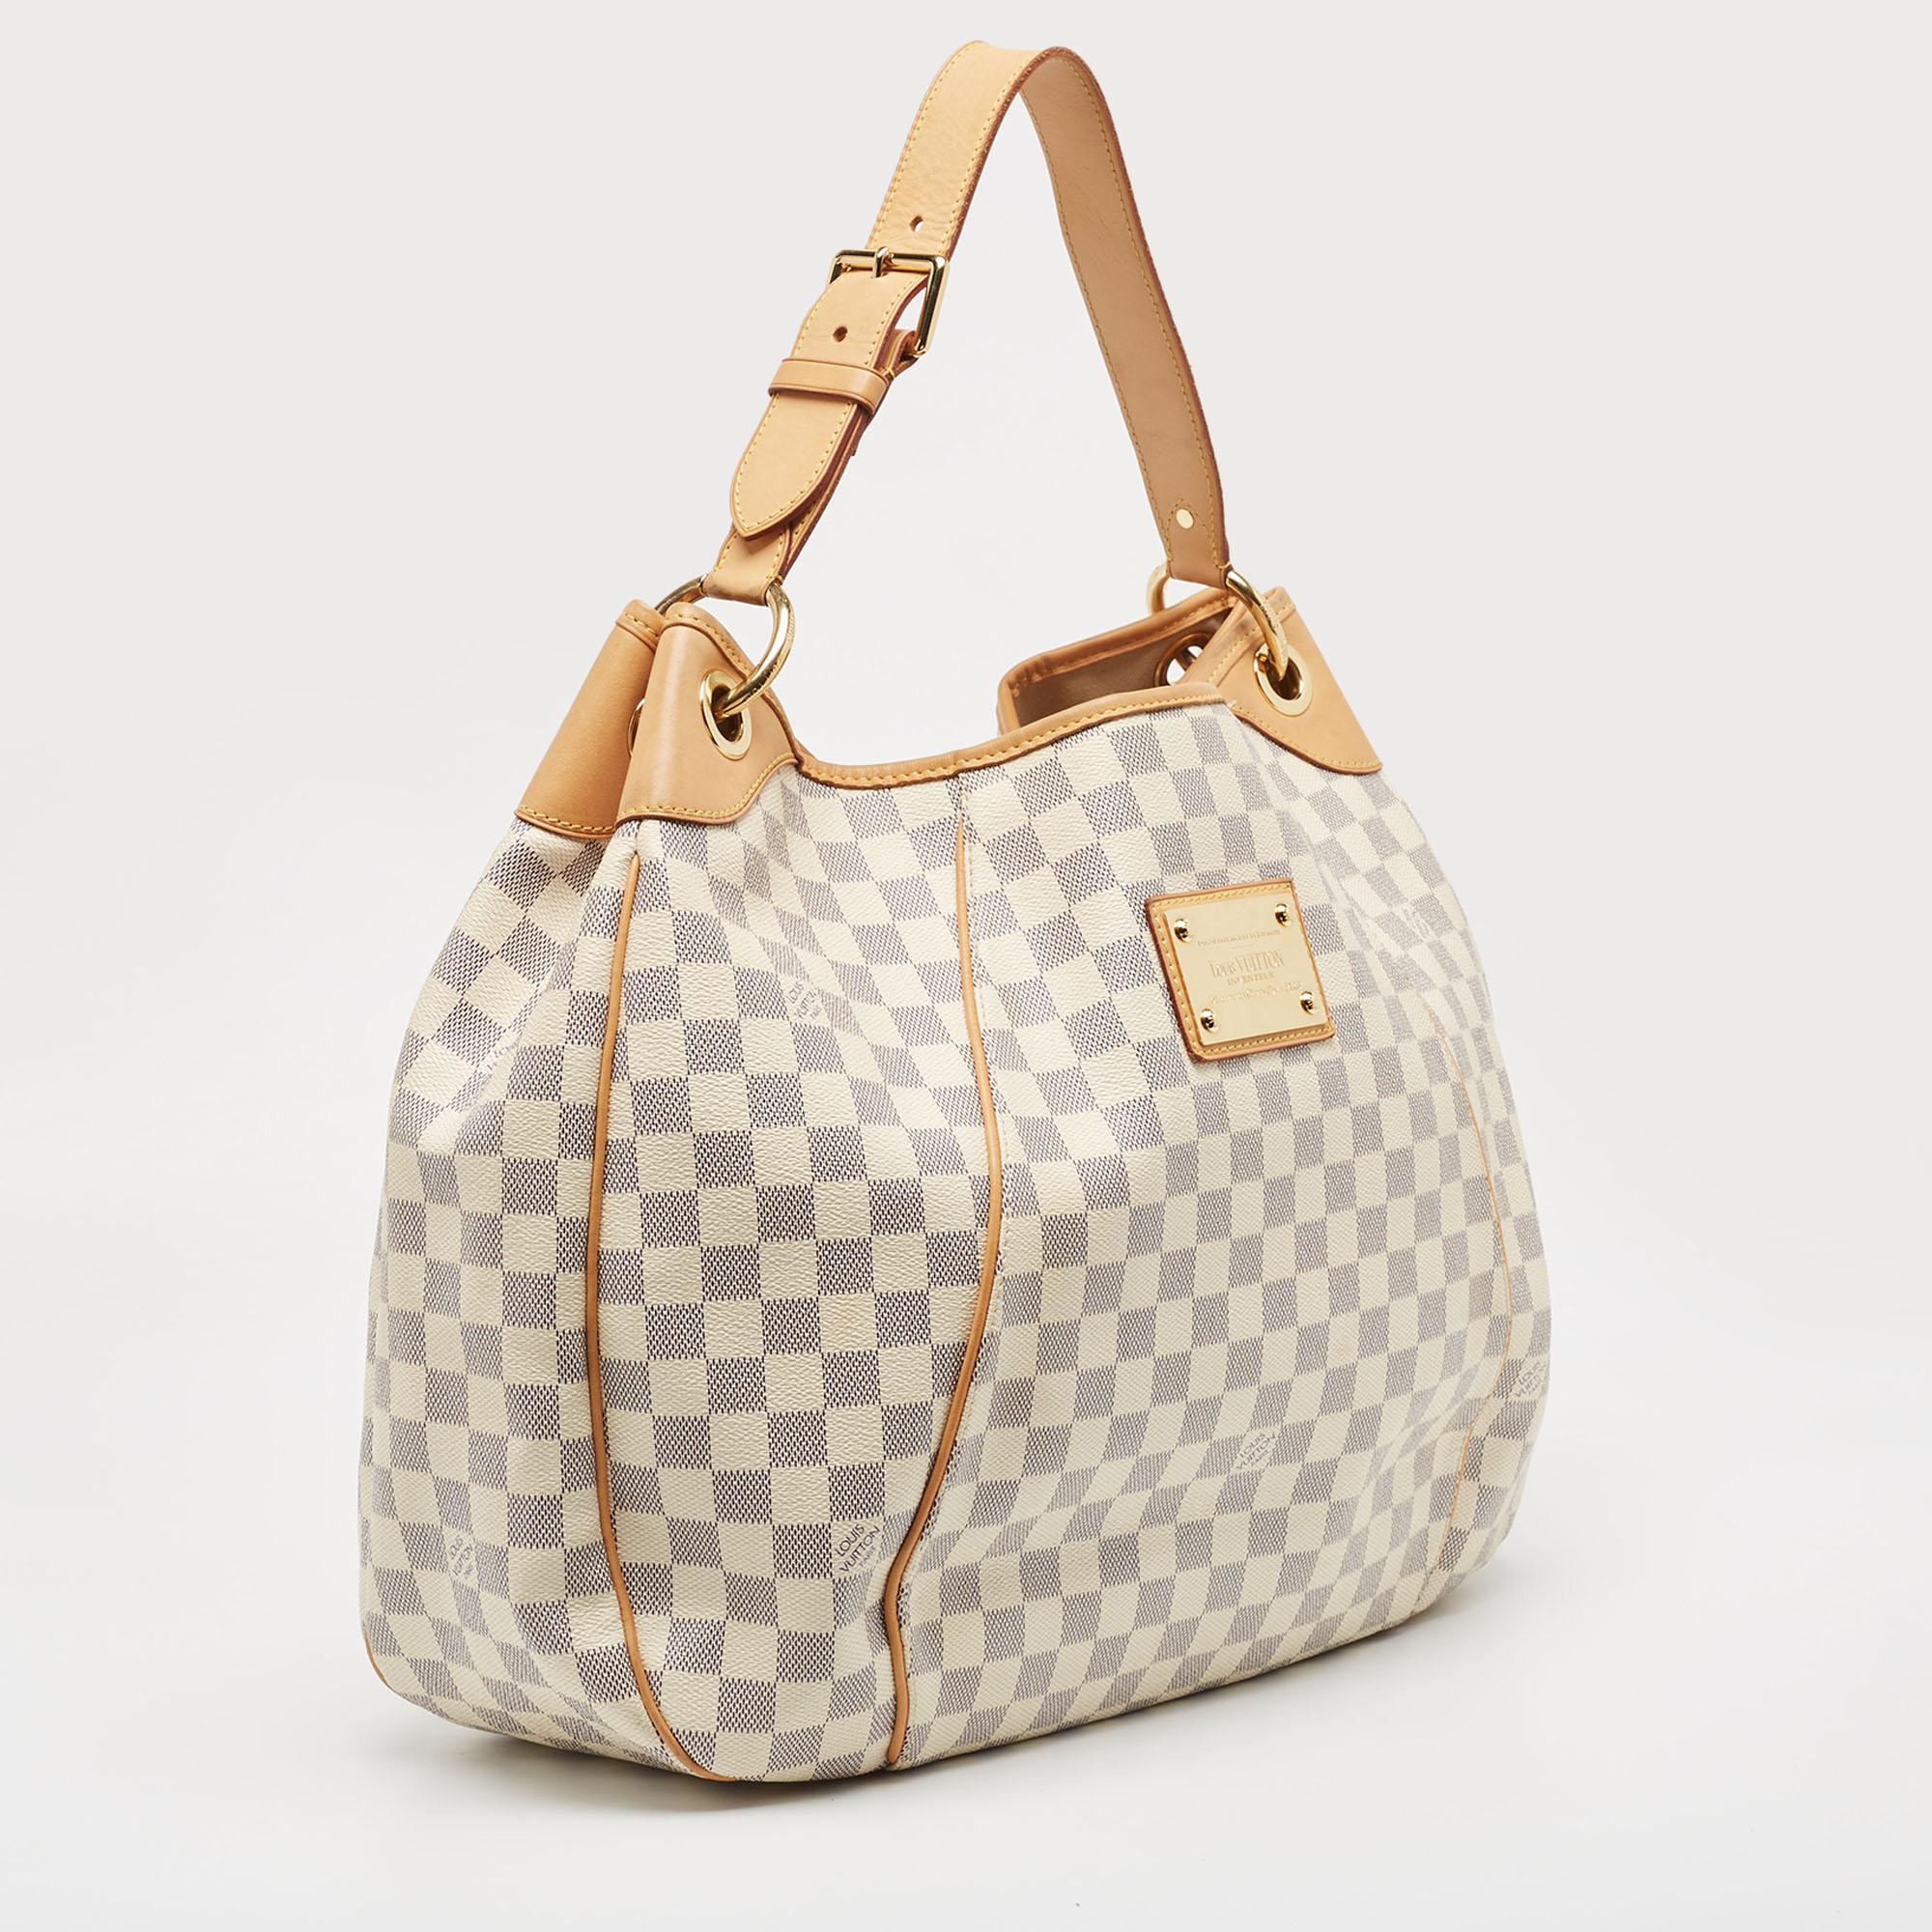 Your dream to own an appealing Louis Vuitton handbag has come true in this gorgeous piece. Crafted from Damier Azur canvas, this bag features a single handle, a snap button, and gold-tone hardware. While the front brand plaque elevates its beauty,